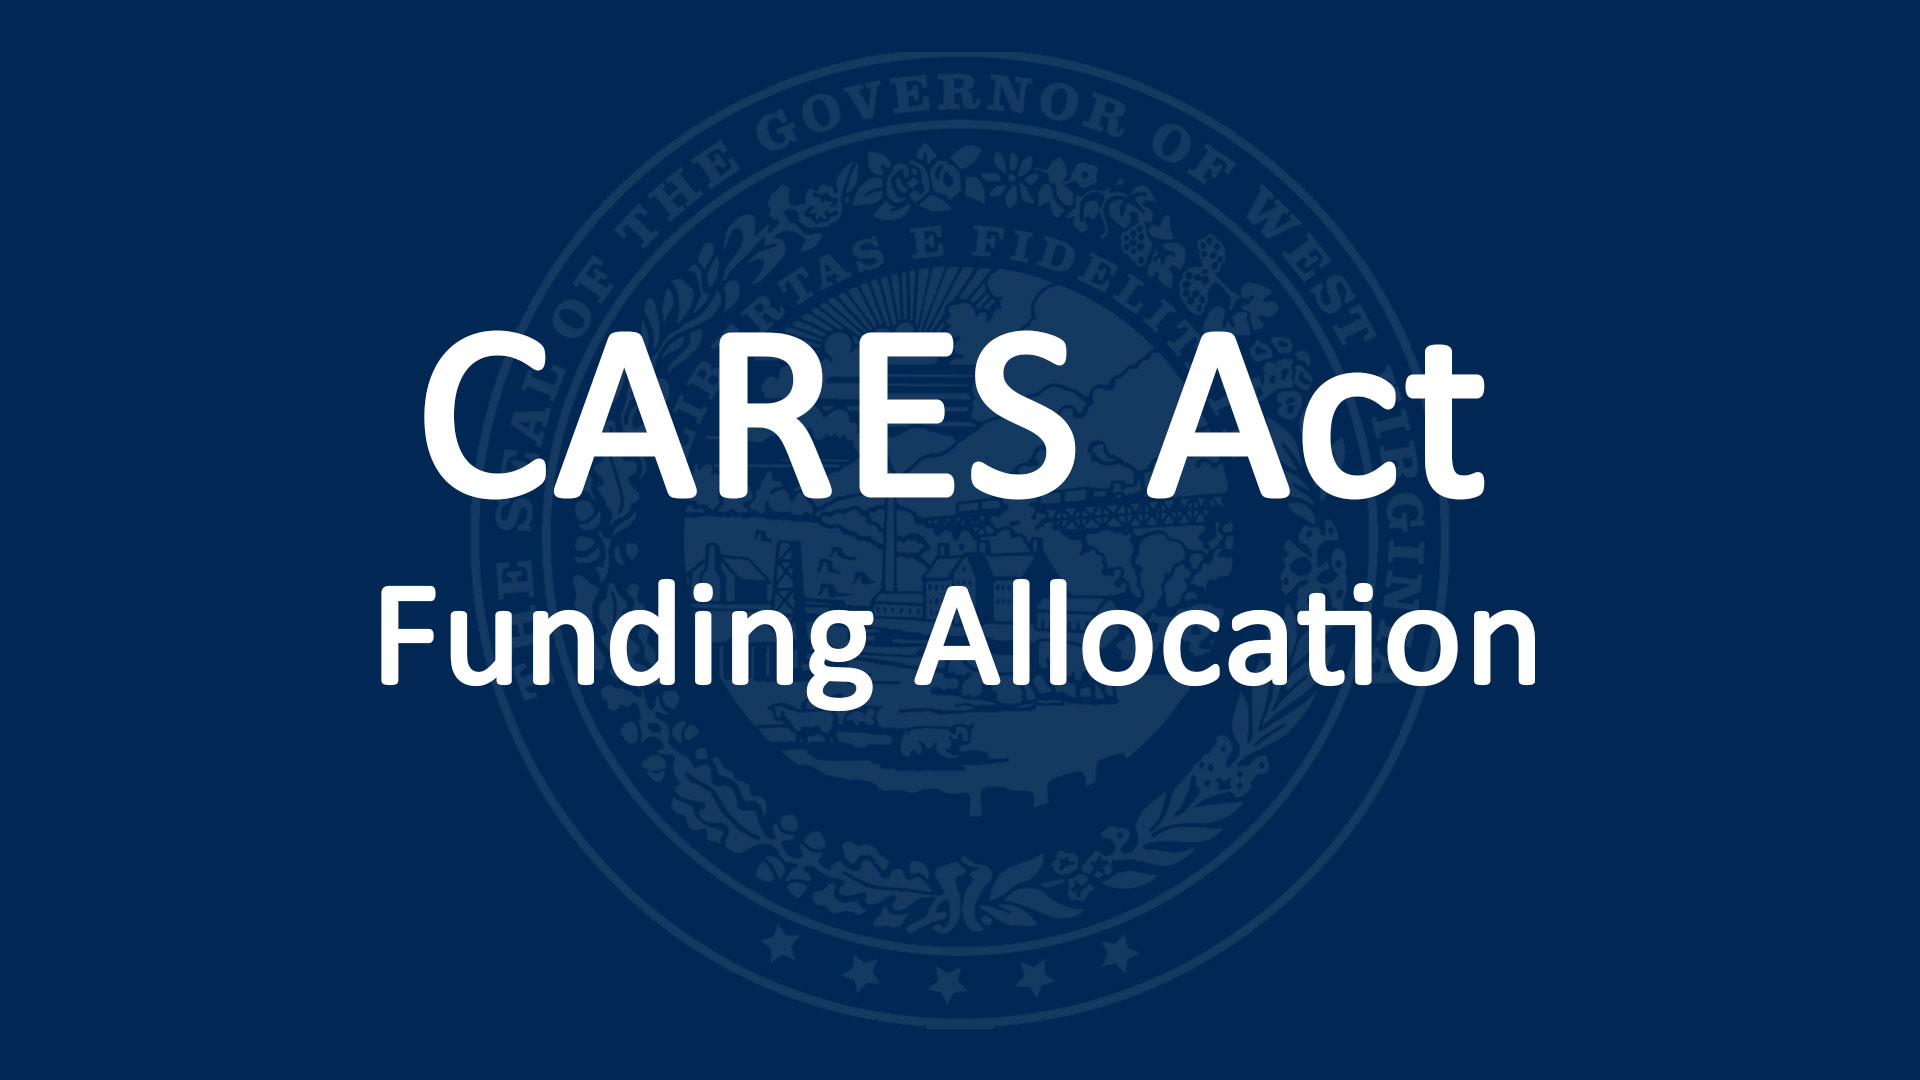 CARES Act Funding Allocation